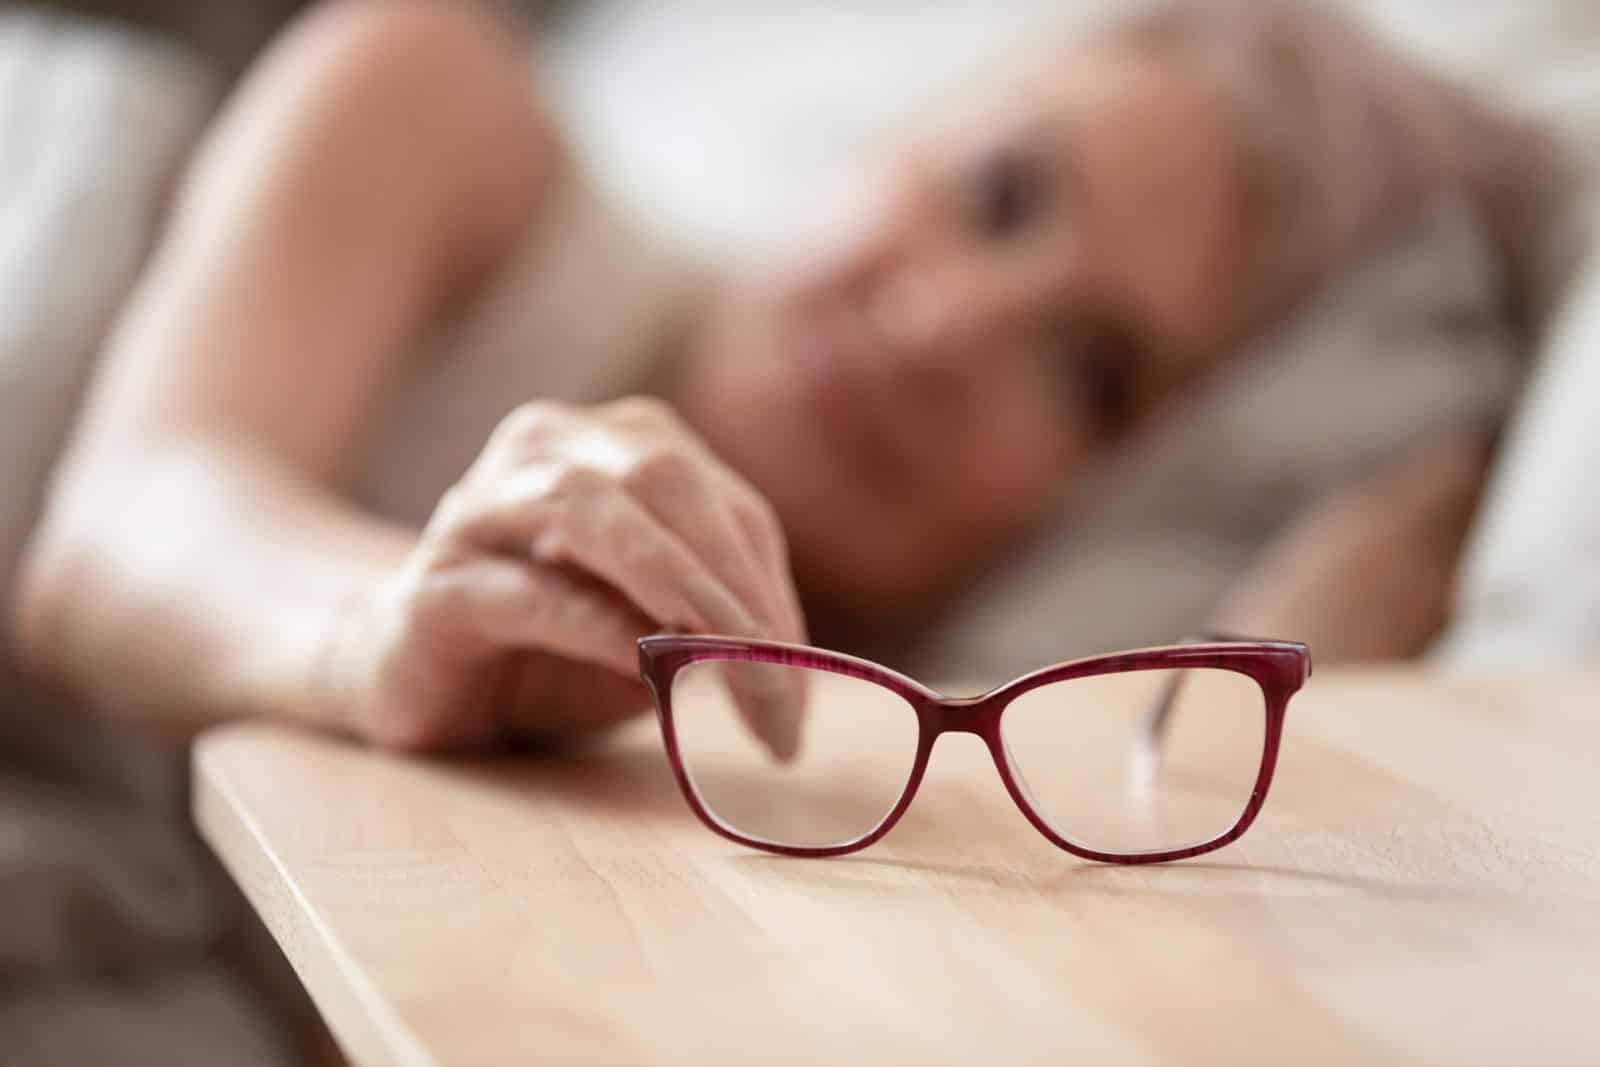 Wear Contact Lenses Why You Should Always Have A Pair Of Backup Glasses Access Eye